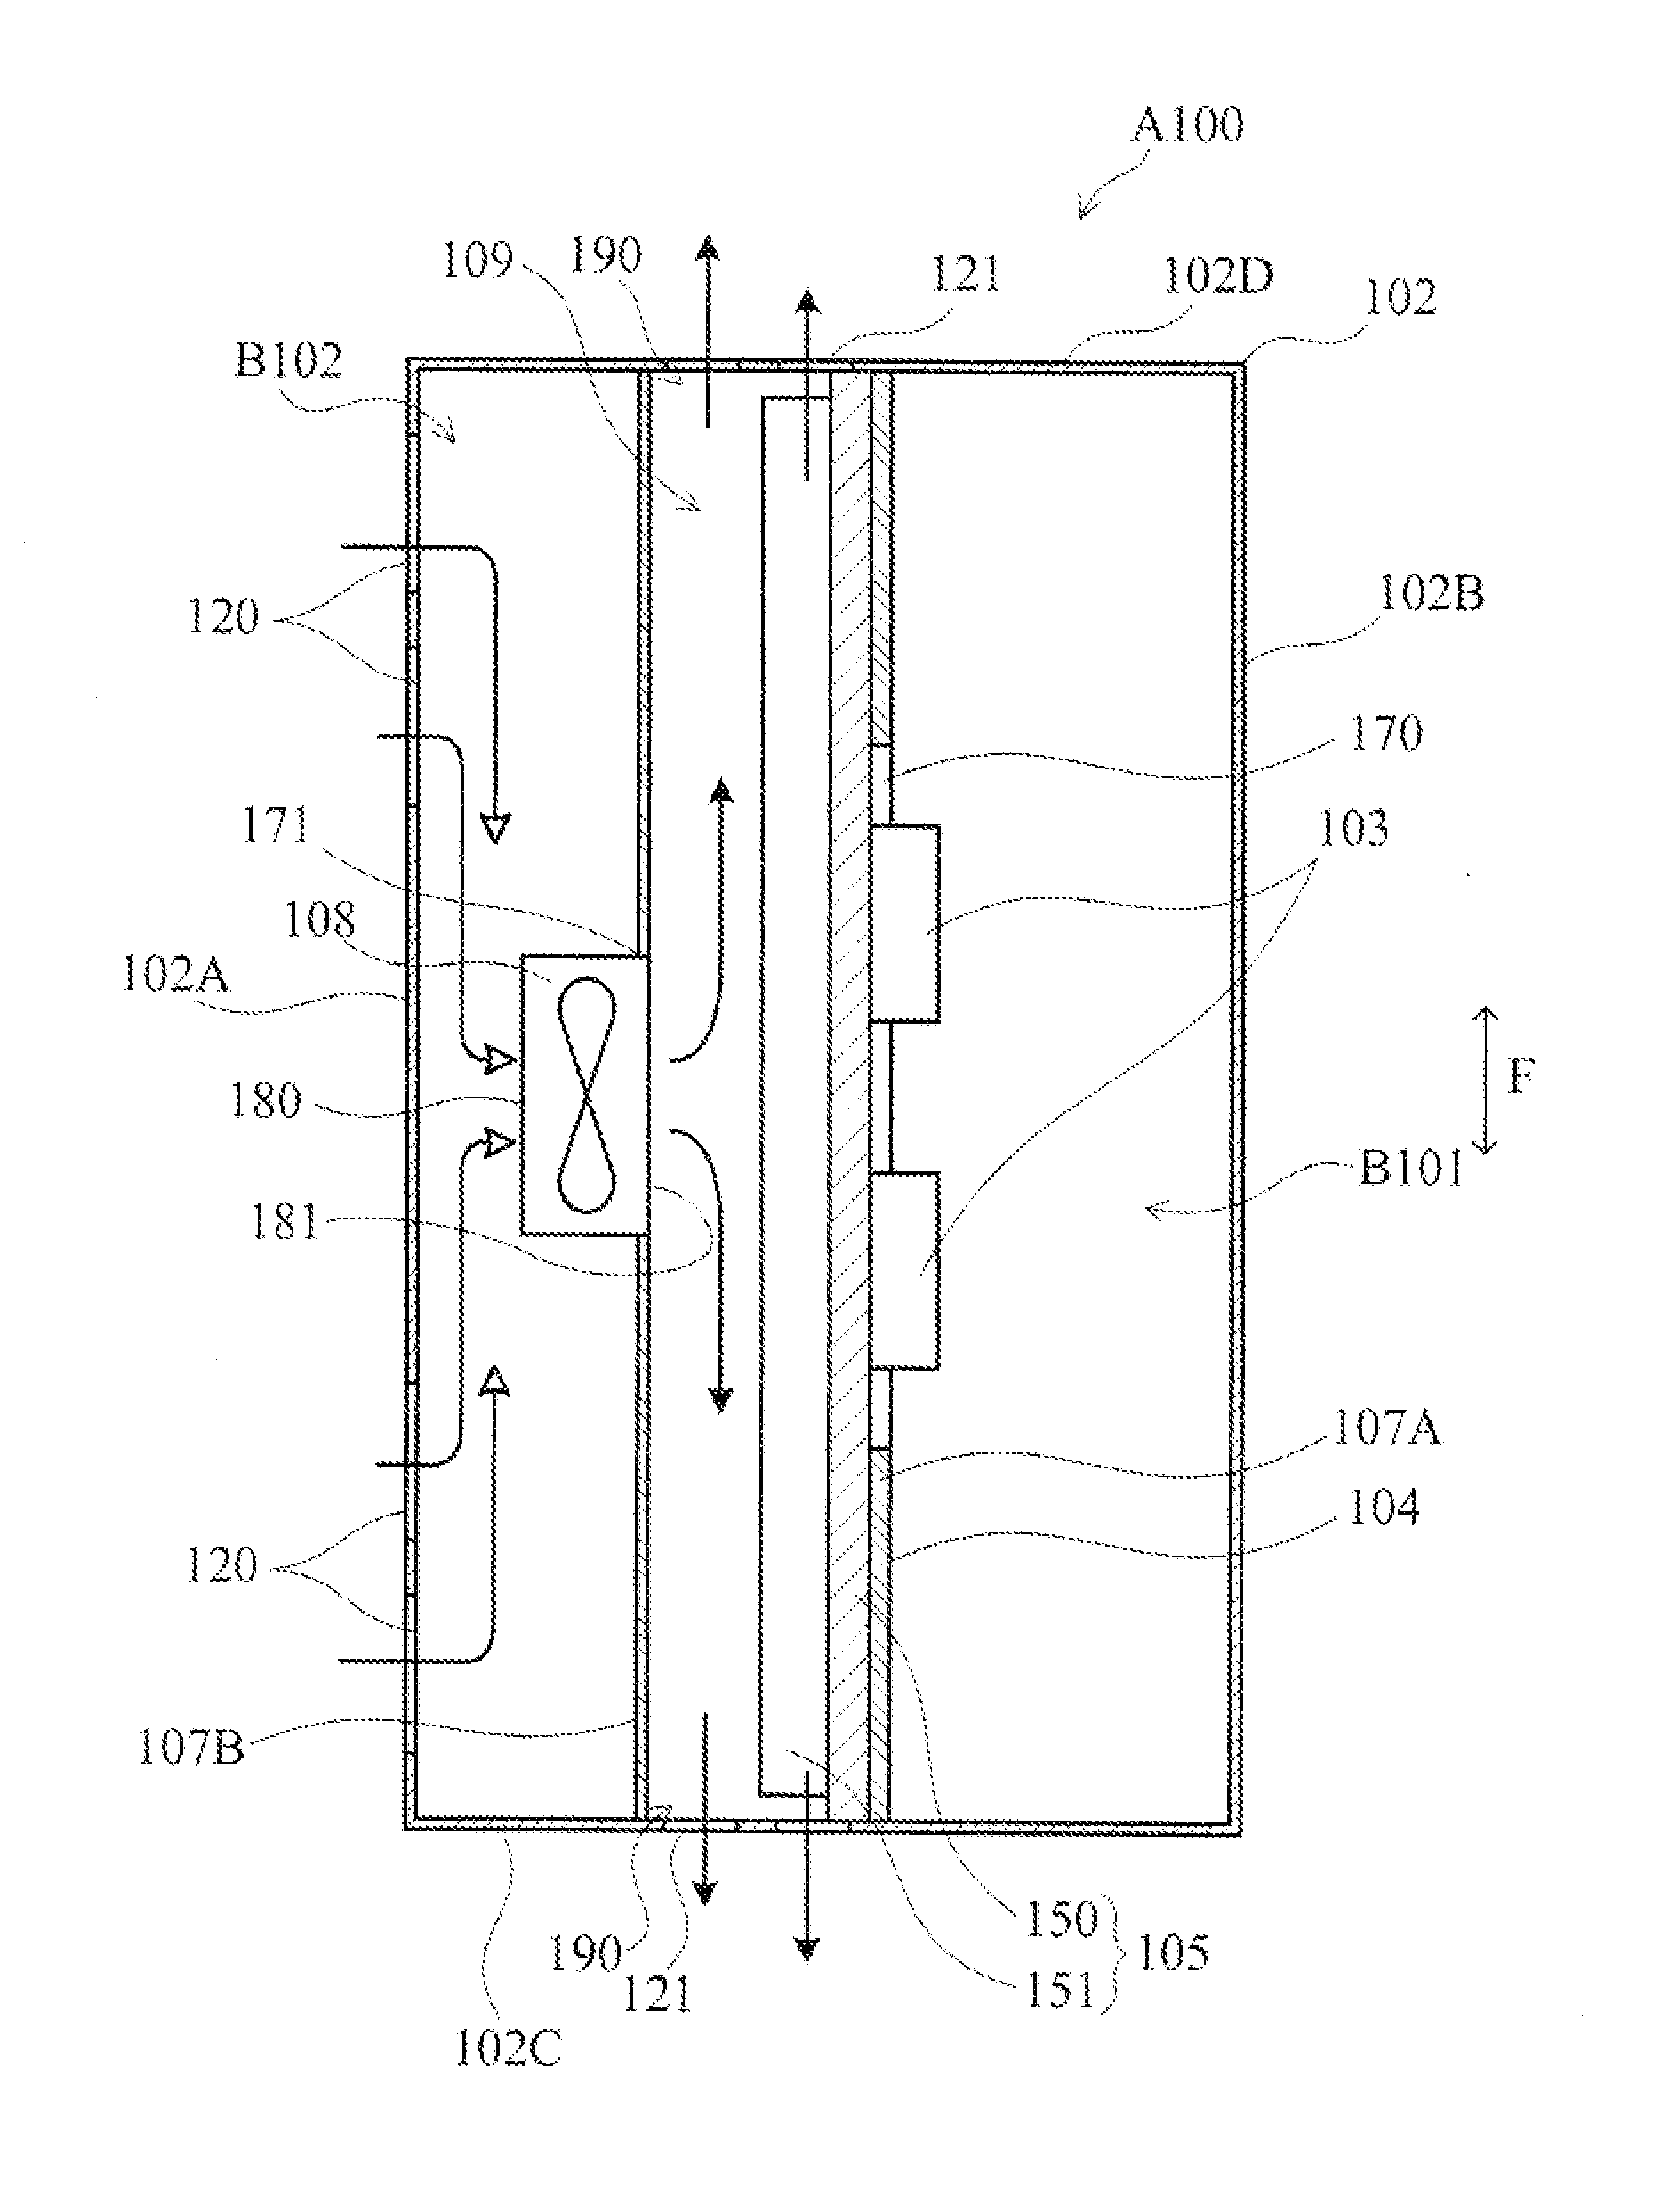 Power supply apparatus including fan for air cooling